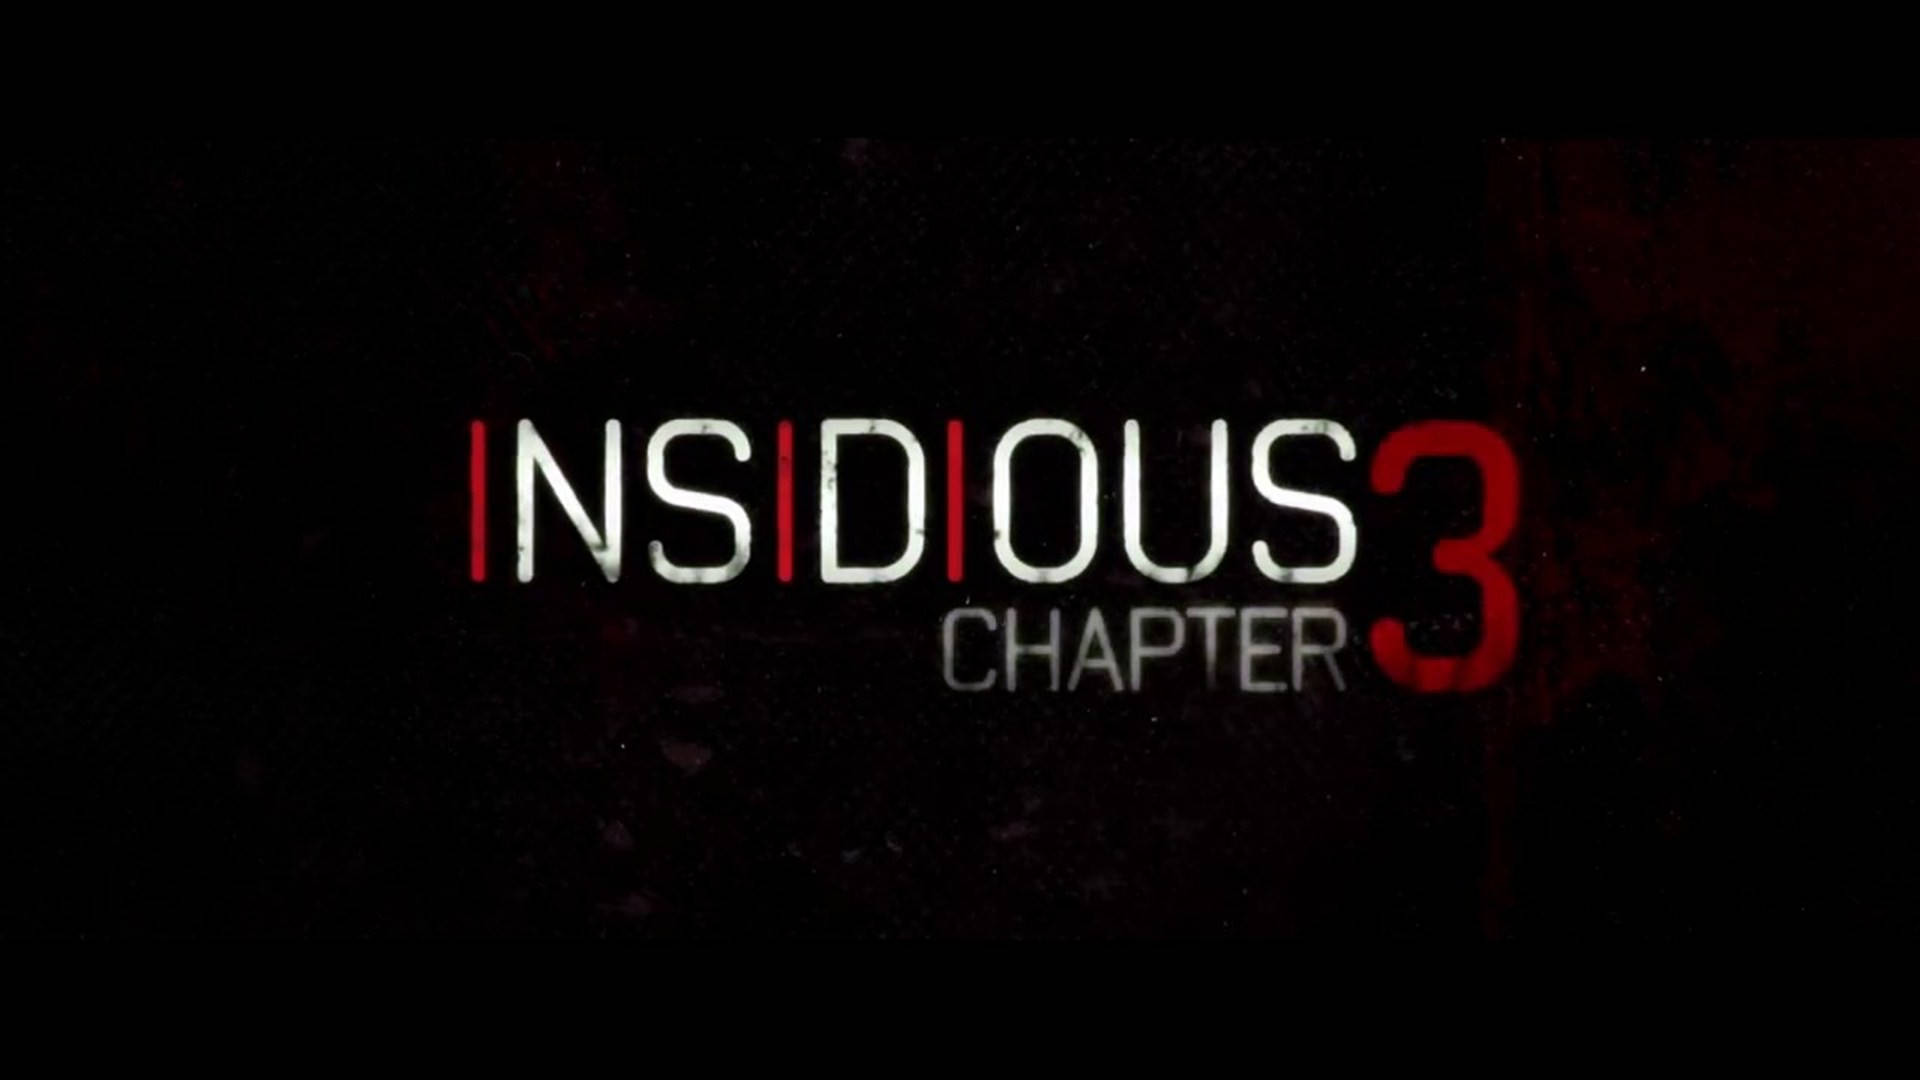 Insidious Chapter 3 Movie Background